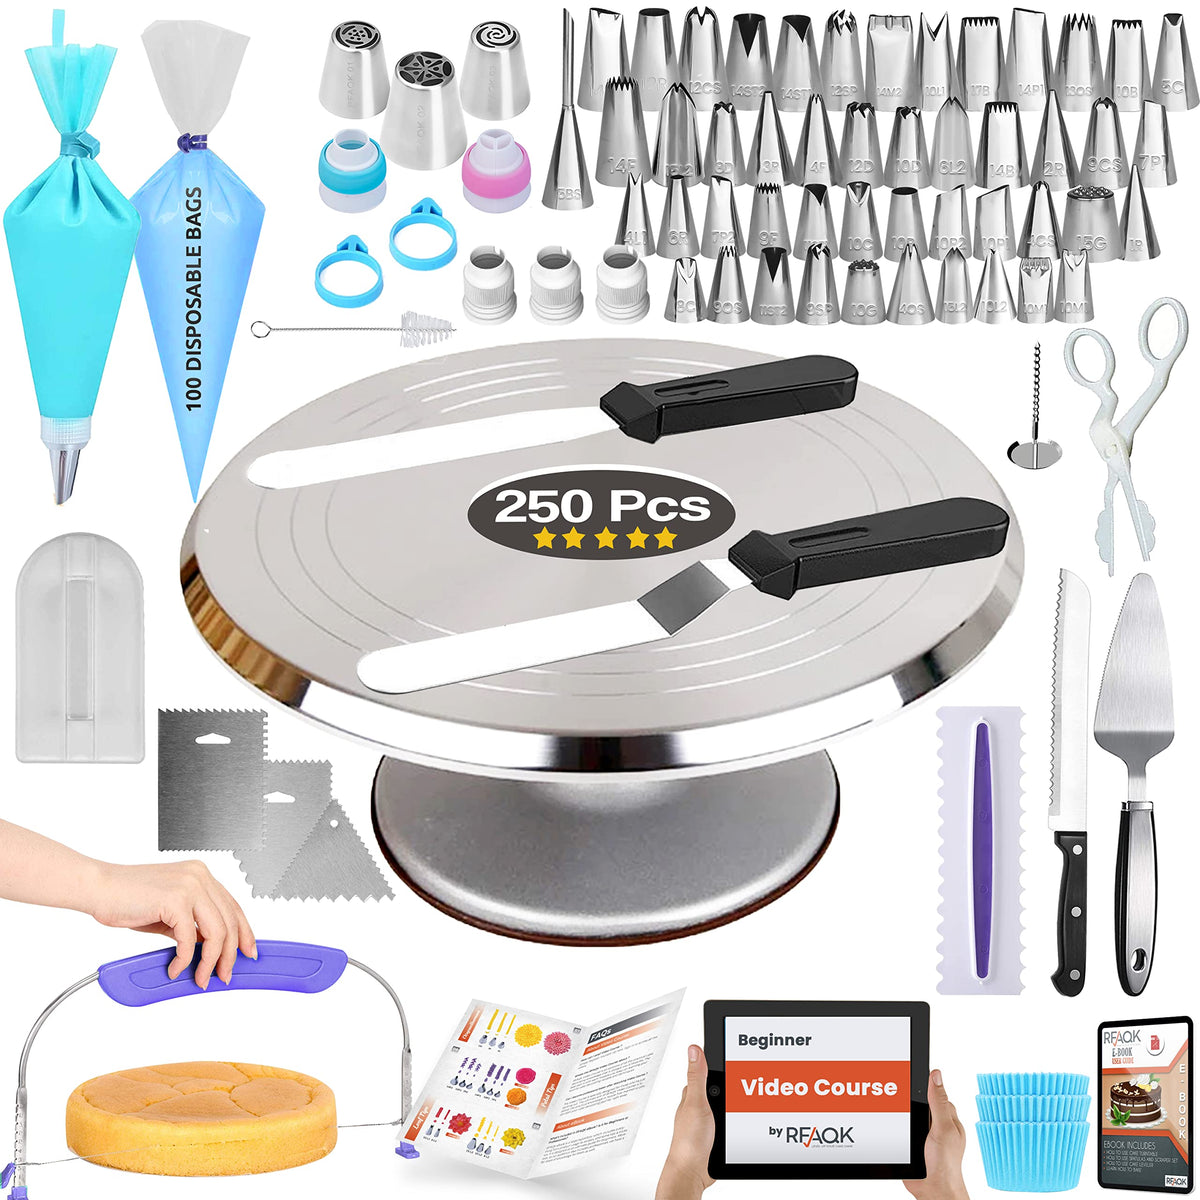  12.2” Rotating Cake Decorating Turntable for Cakes,Cake  Turntable - 12'' Rotating Cake Decorating Stand with 2 Angled Icing  Spatulas and 3 Comb Icing Smoother : Home & Kitchen